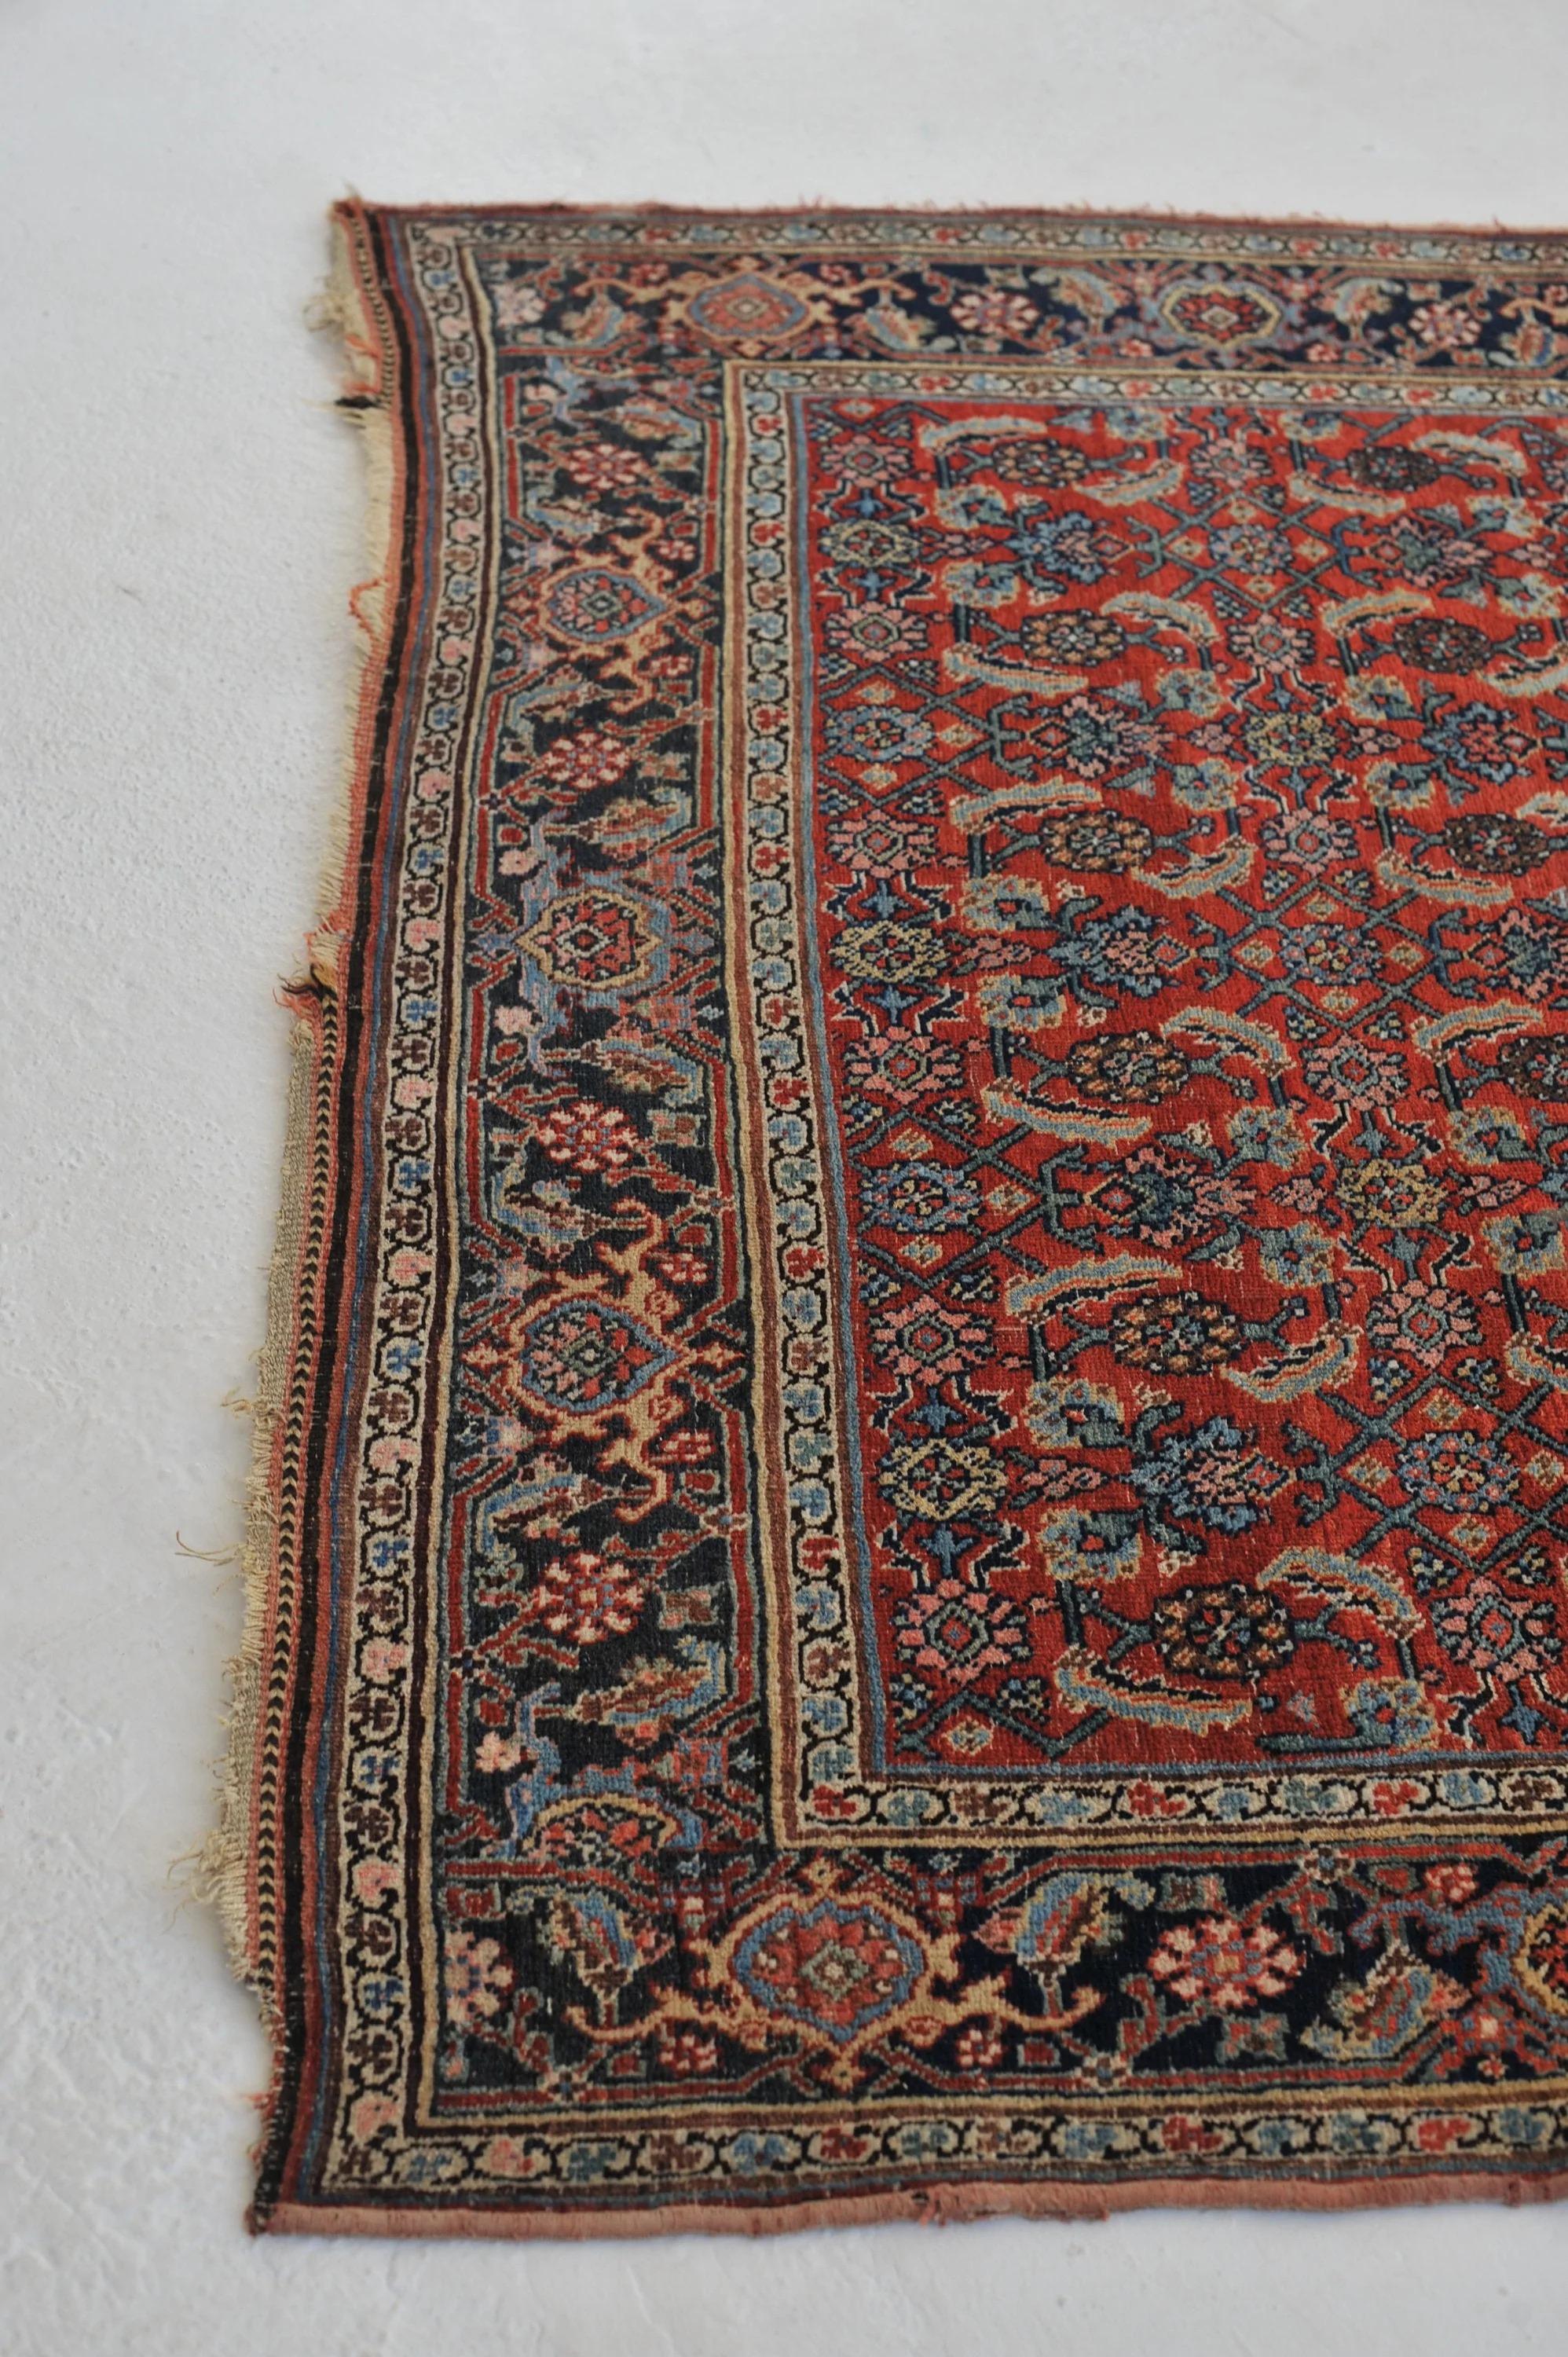 Sensational Antique Rug Rare Piece with Lovely Size & Iconic Herati Pattern

About: Incredible piece woven in one of my favorite rug weaving villages on the planet - it has been said that these weavers wet the wool before they weave and tie the